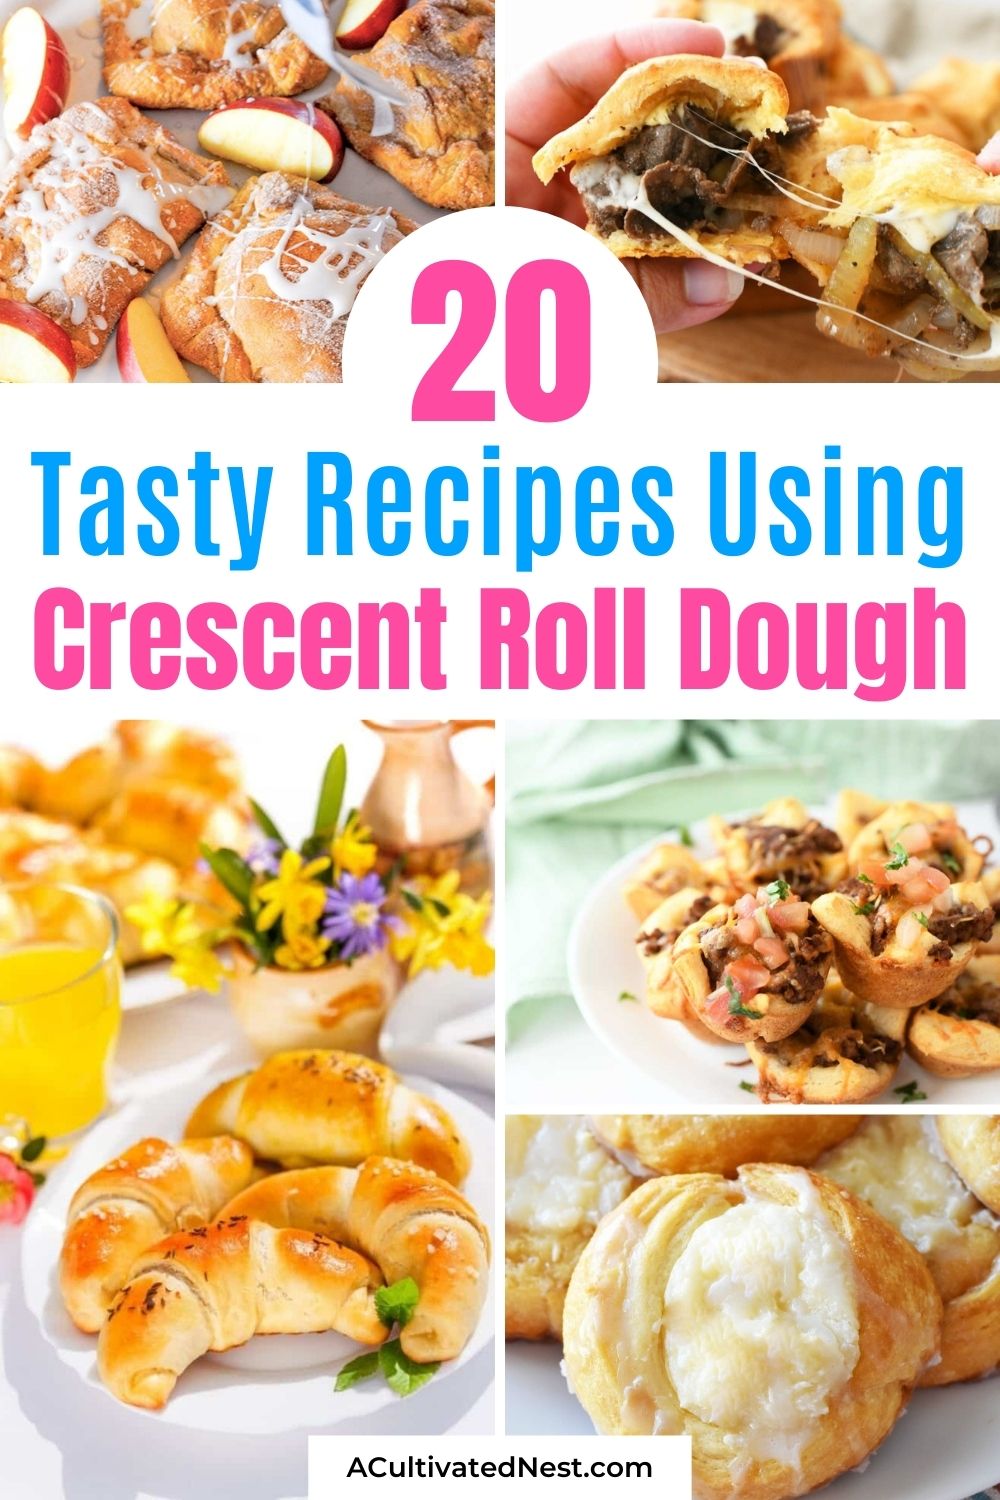 20 Tasty Things To Make With Crescent Roll Dough- Whether you want something sweet or savory, or something for breakfast, dinner, or dessert, you'll find it in this list of 20 delicious things to make with crescent roll dough! | #recipe #recipes #baking #desserts #ACultivatedNest